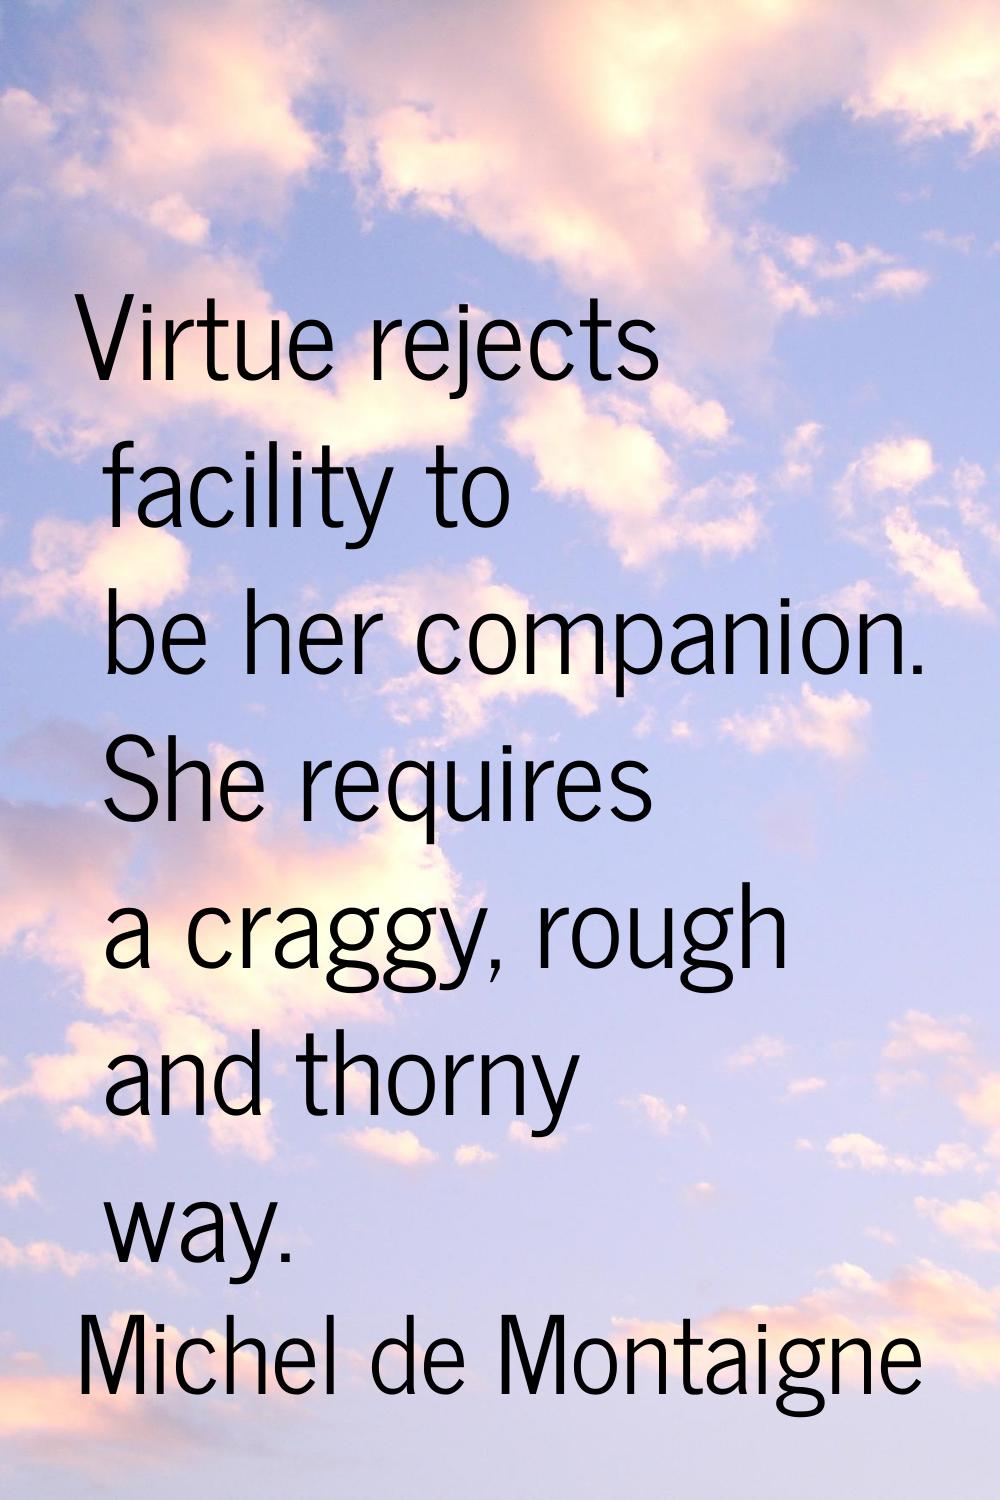 Virtue rejects facility to be her companion. She requires a craggy, rough and thorny way.